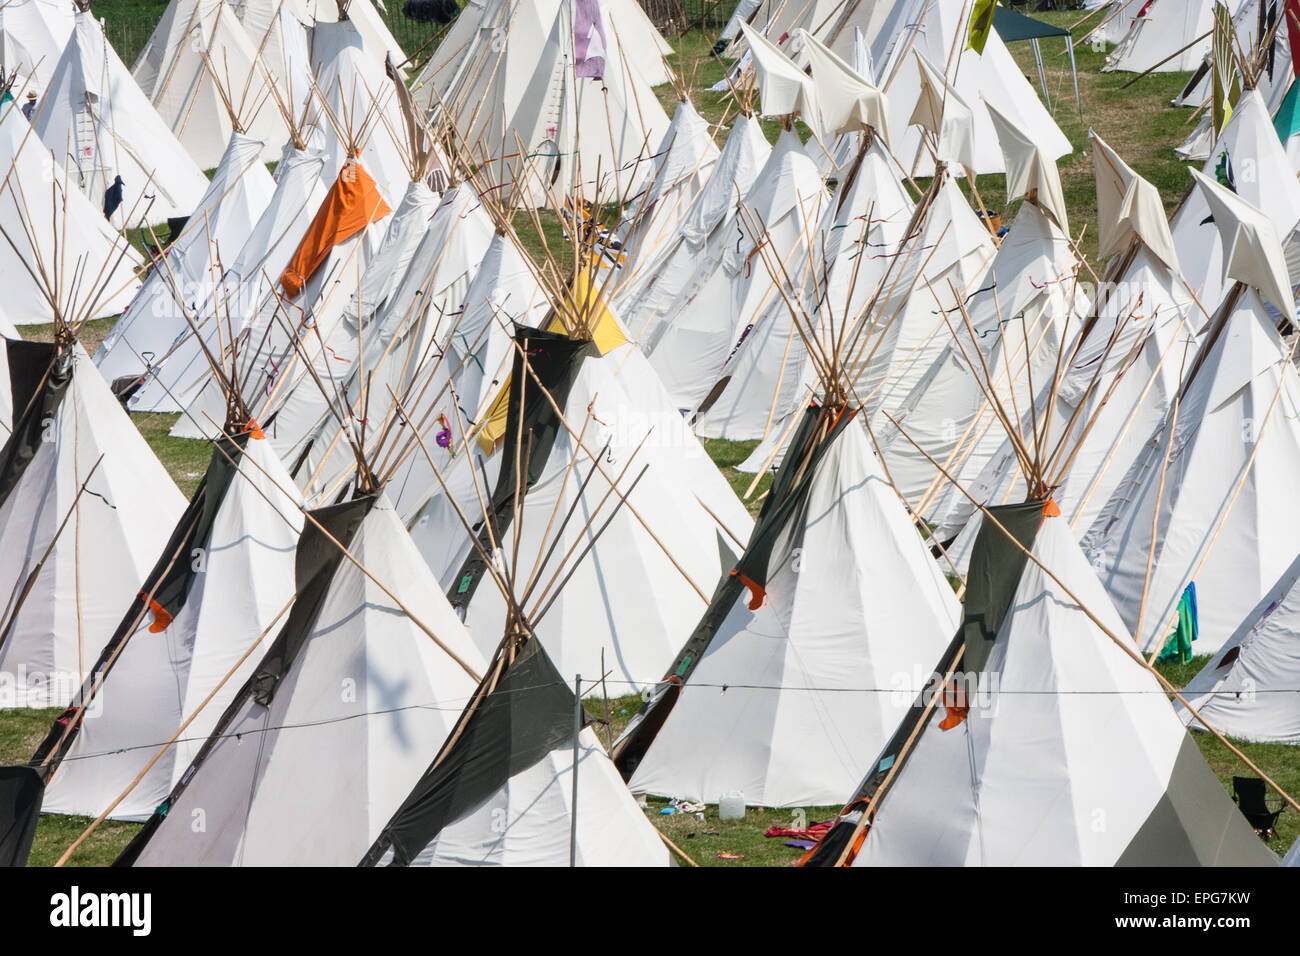 Glamping.Tepee/ tipi,wigwam, tents, available to hire at luxury tent teepee village/Tipi Field, an exclusive area, at, Glastonbury Festival,/ 'Glasto Stock Photo